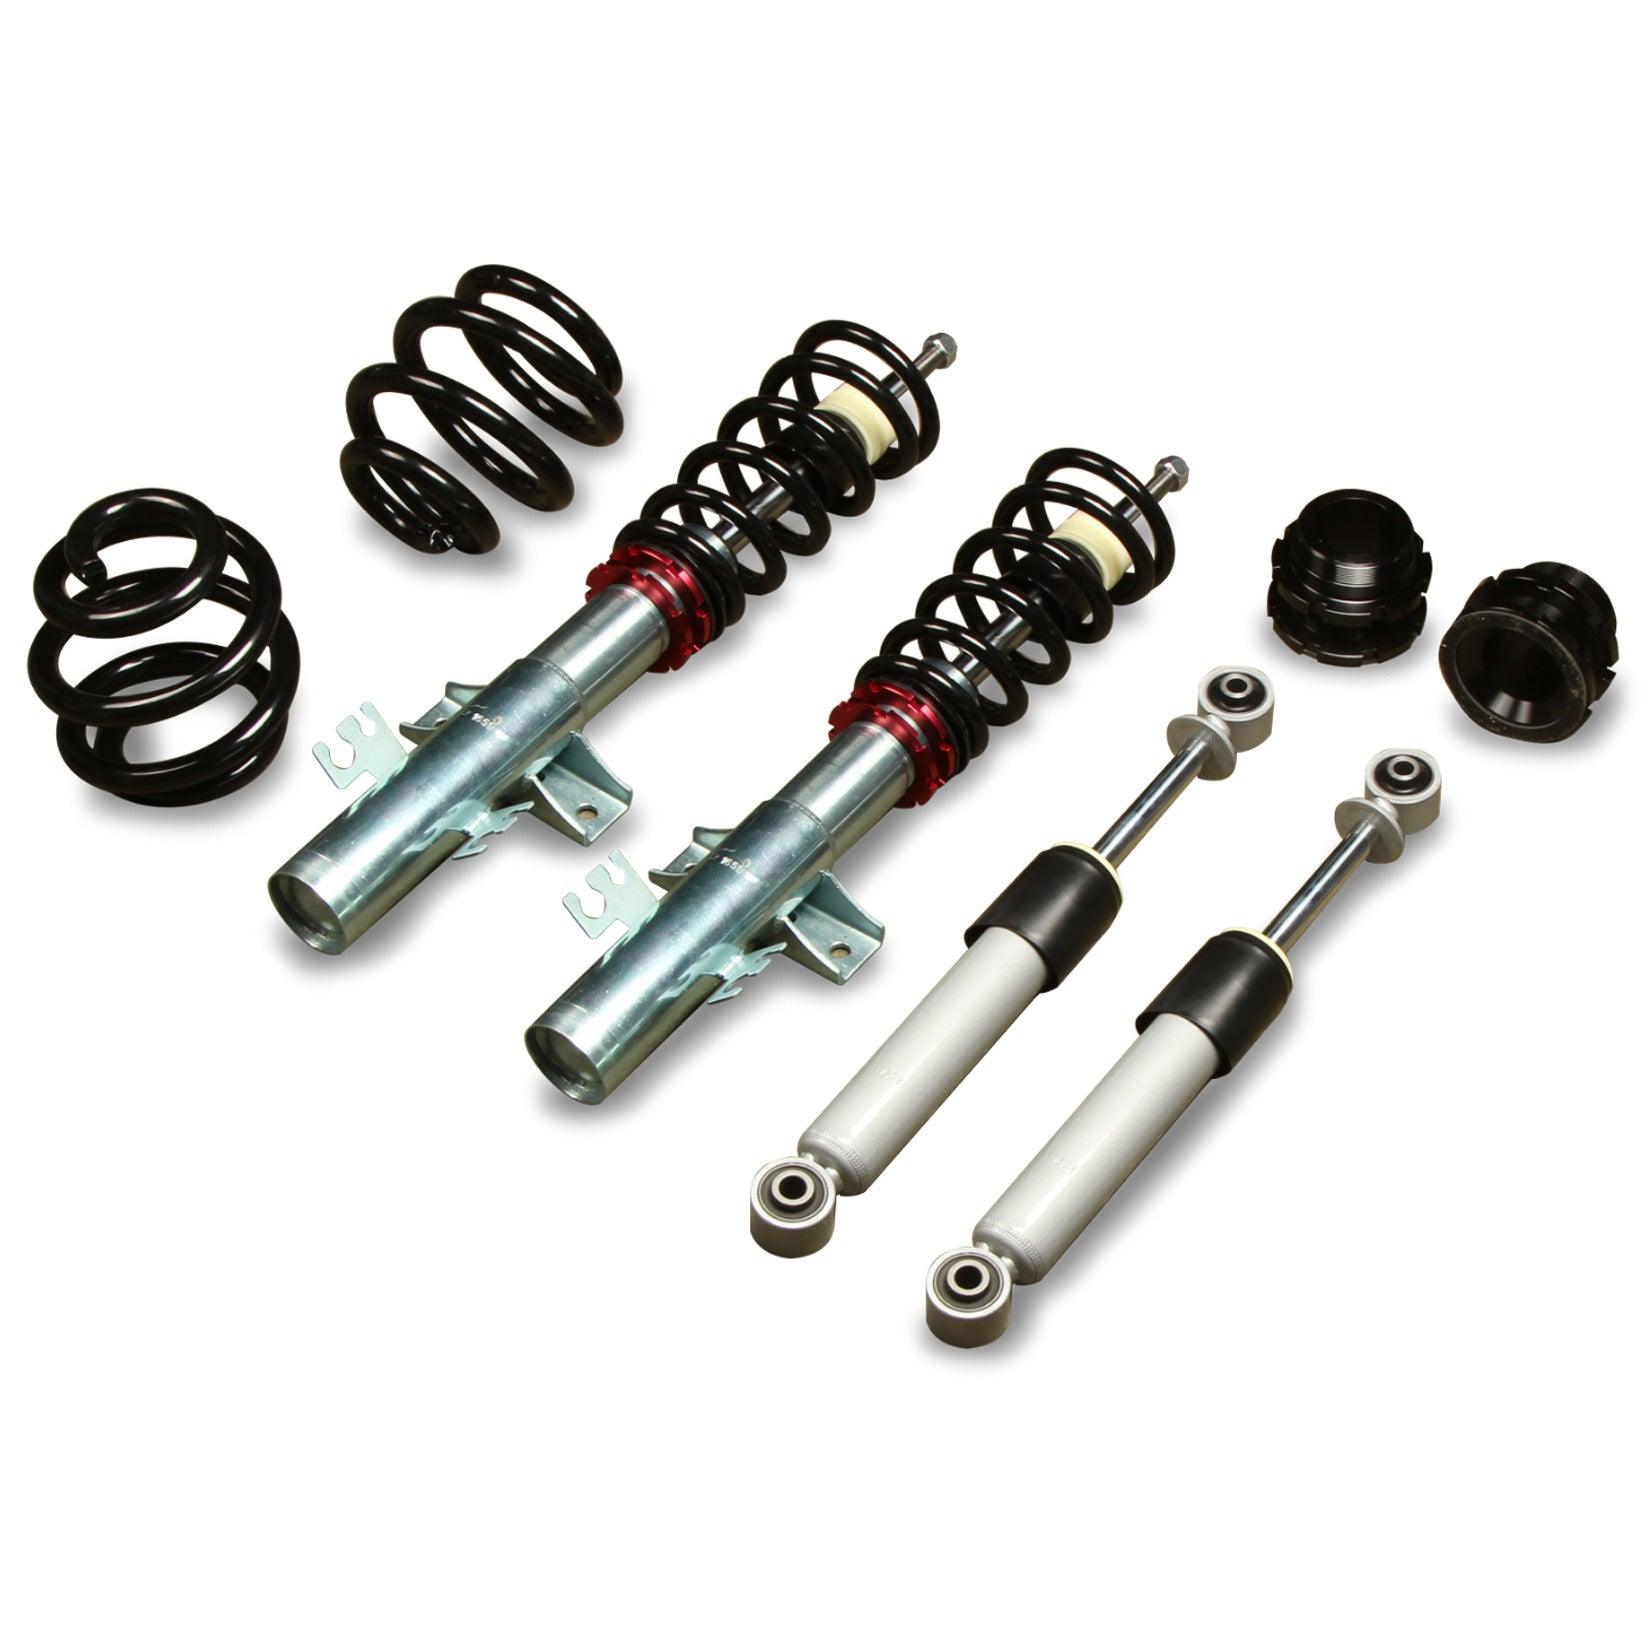 LOW PRO ADJUSTABLE COILOVER KIT – VW TRANSPORTER T5 T6 T28 T30 - 2003 ON - Storm Xccessories2